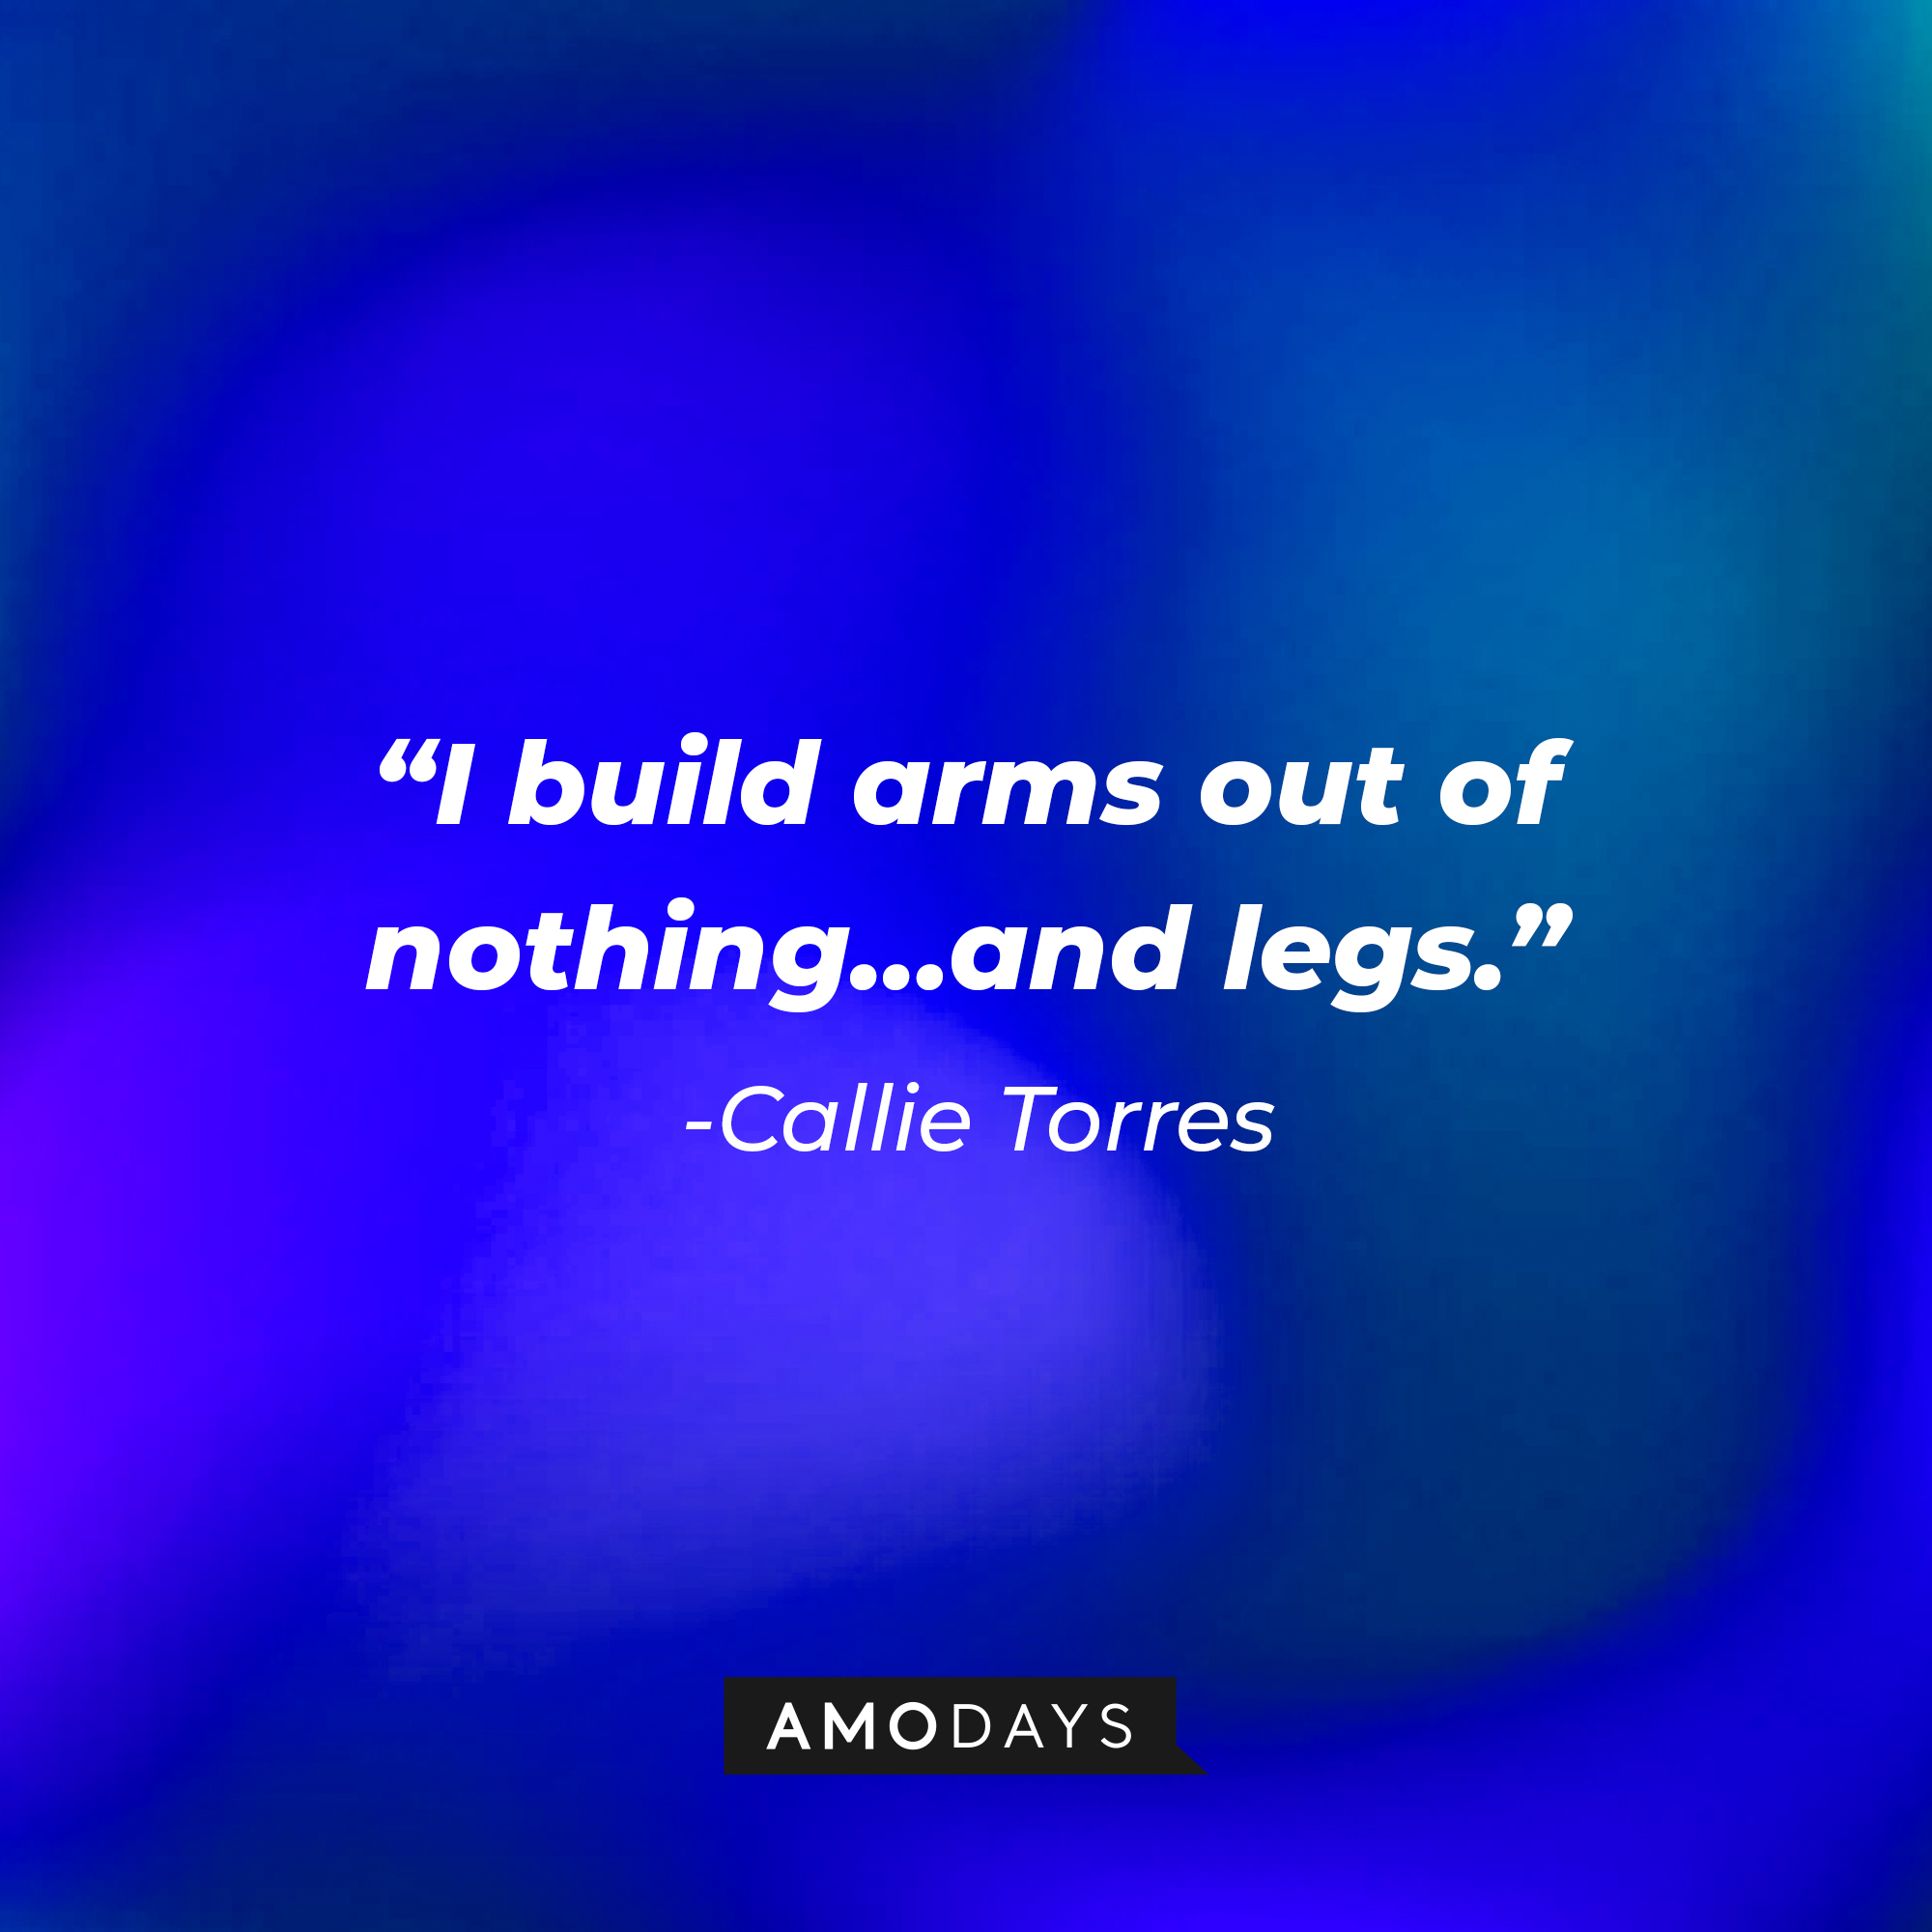 Callie Torres’ quote: "I build arms out of nothing…and legs." |  Source: youtube.com/ABCNetwork